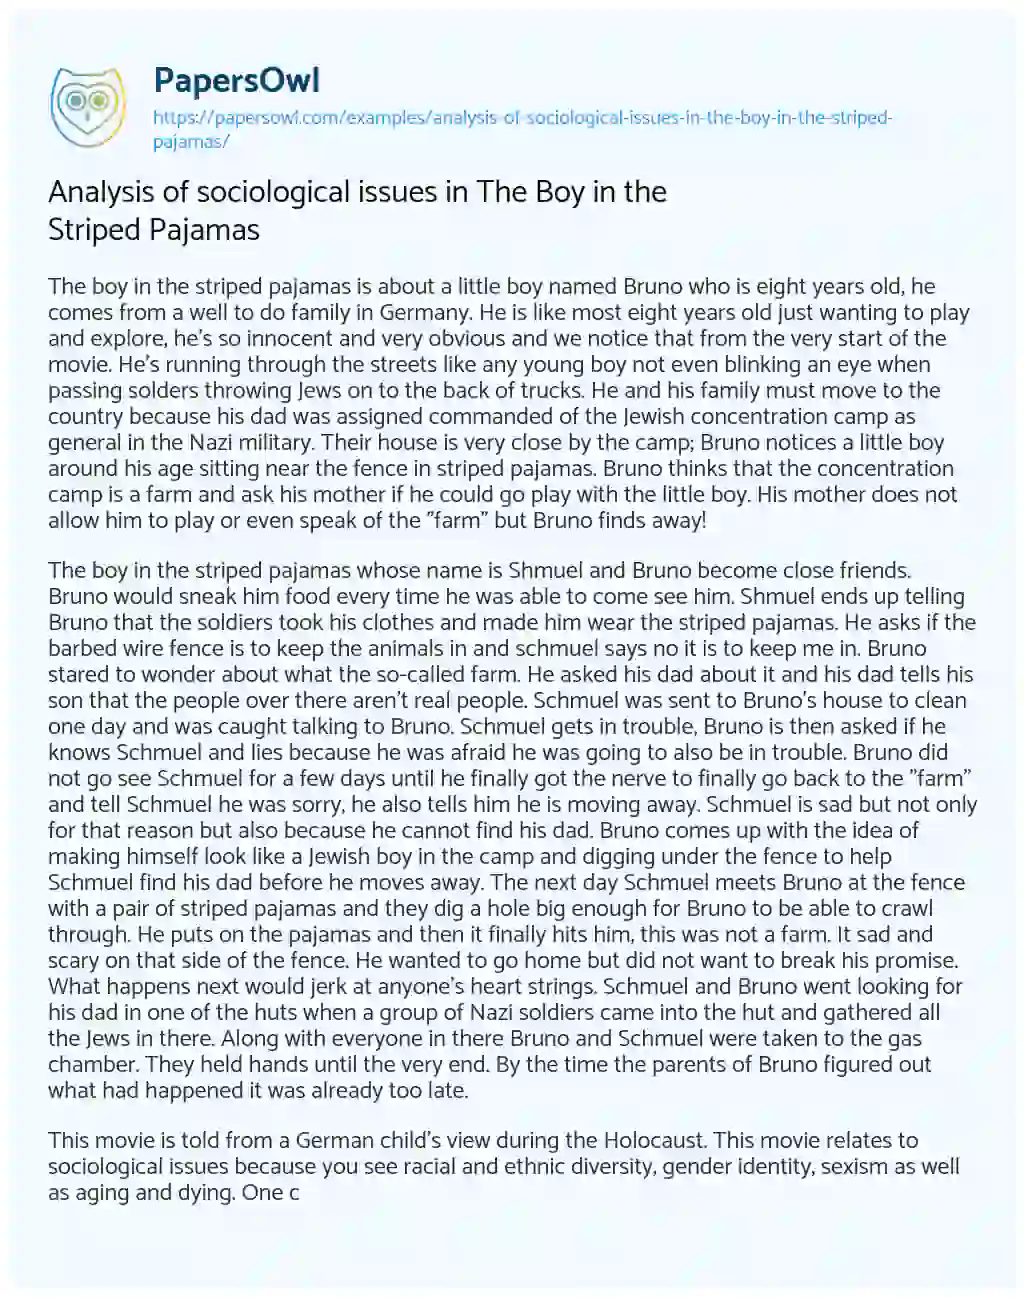 Toezicht houden Gestreept bericht Analysis of sociological issues in The Boy in the Striped Pajamas - Free  Essay Example - 673 Words | PapersOwl.com